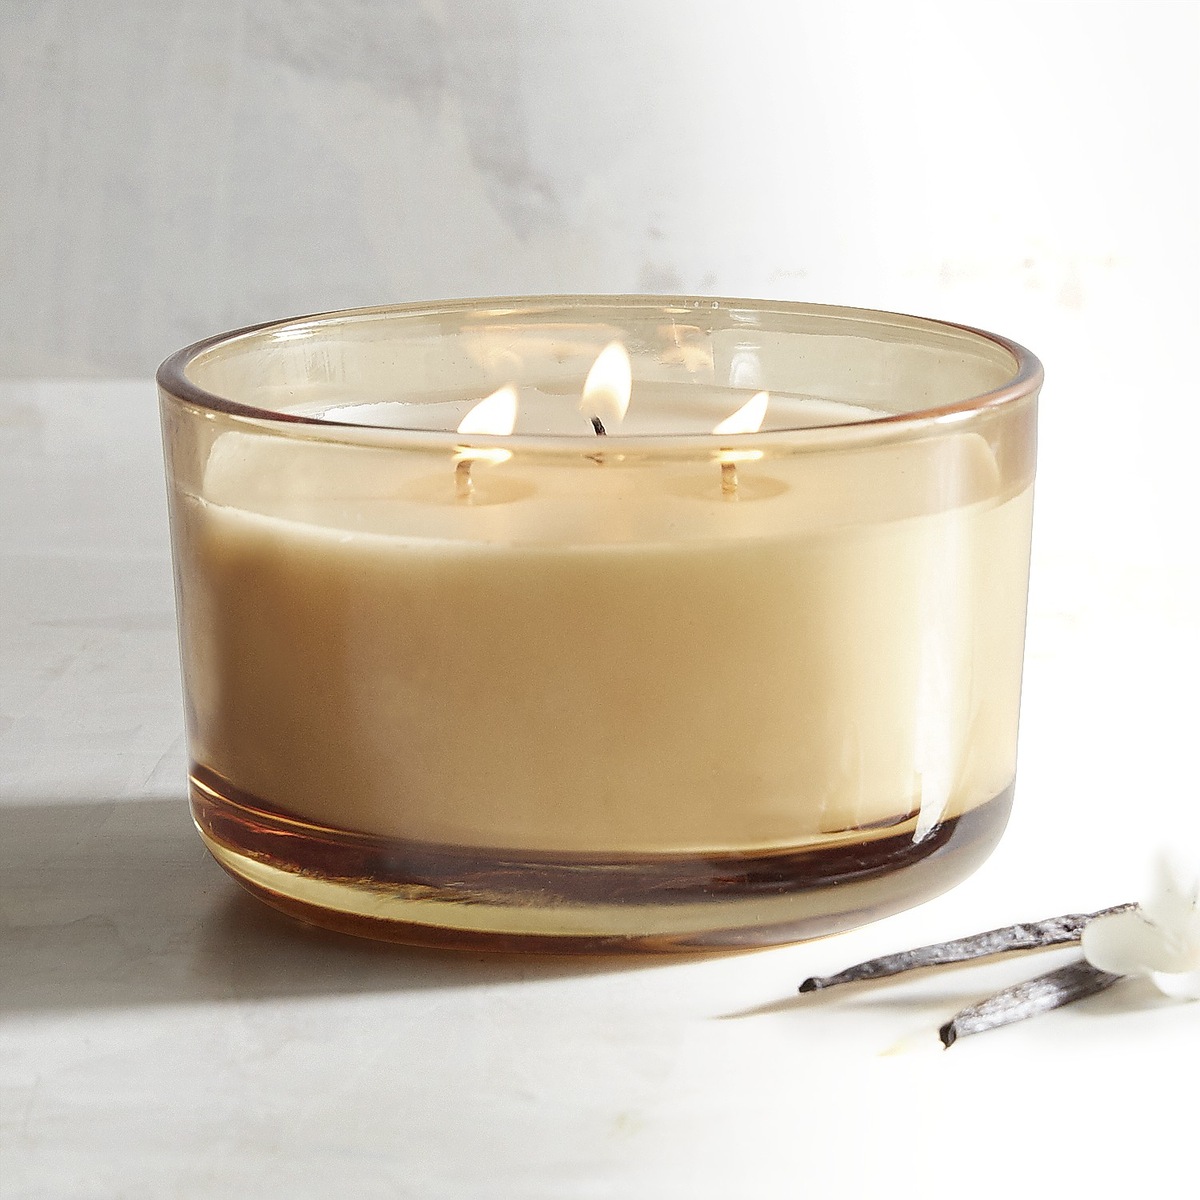 How To Use 3-Wick Candles